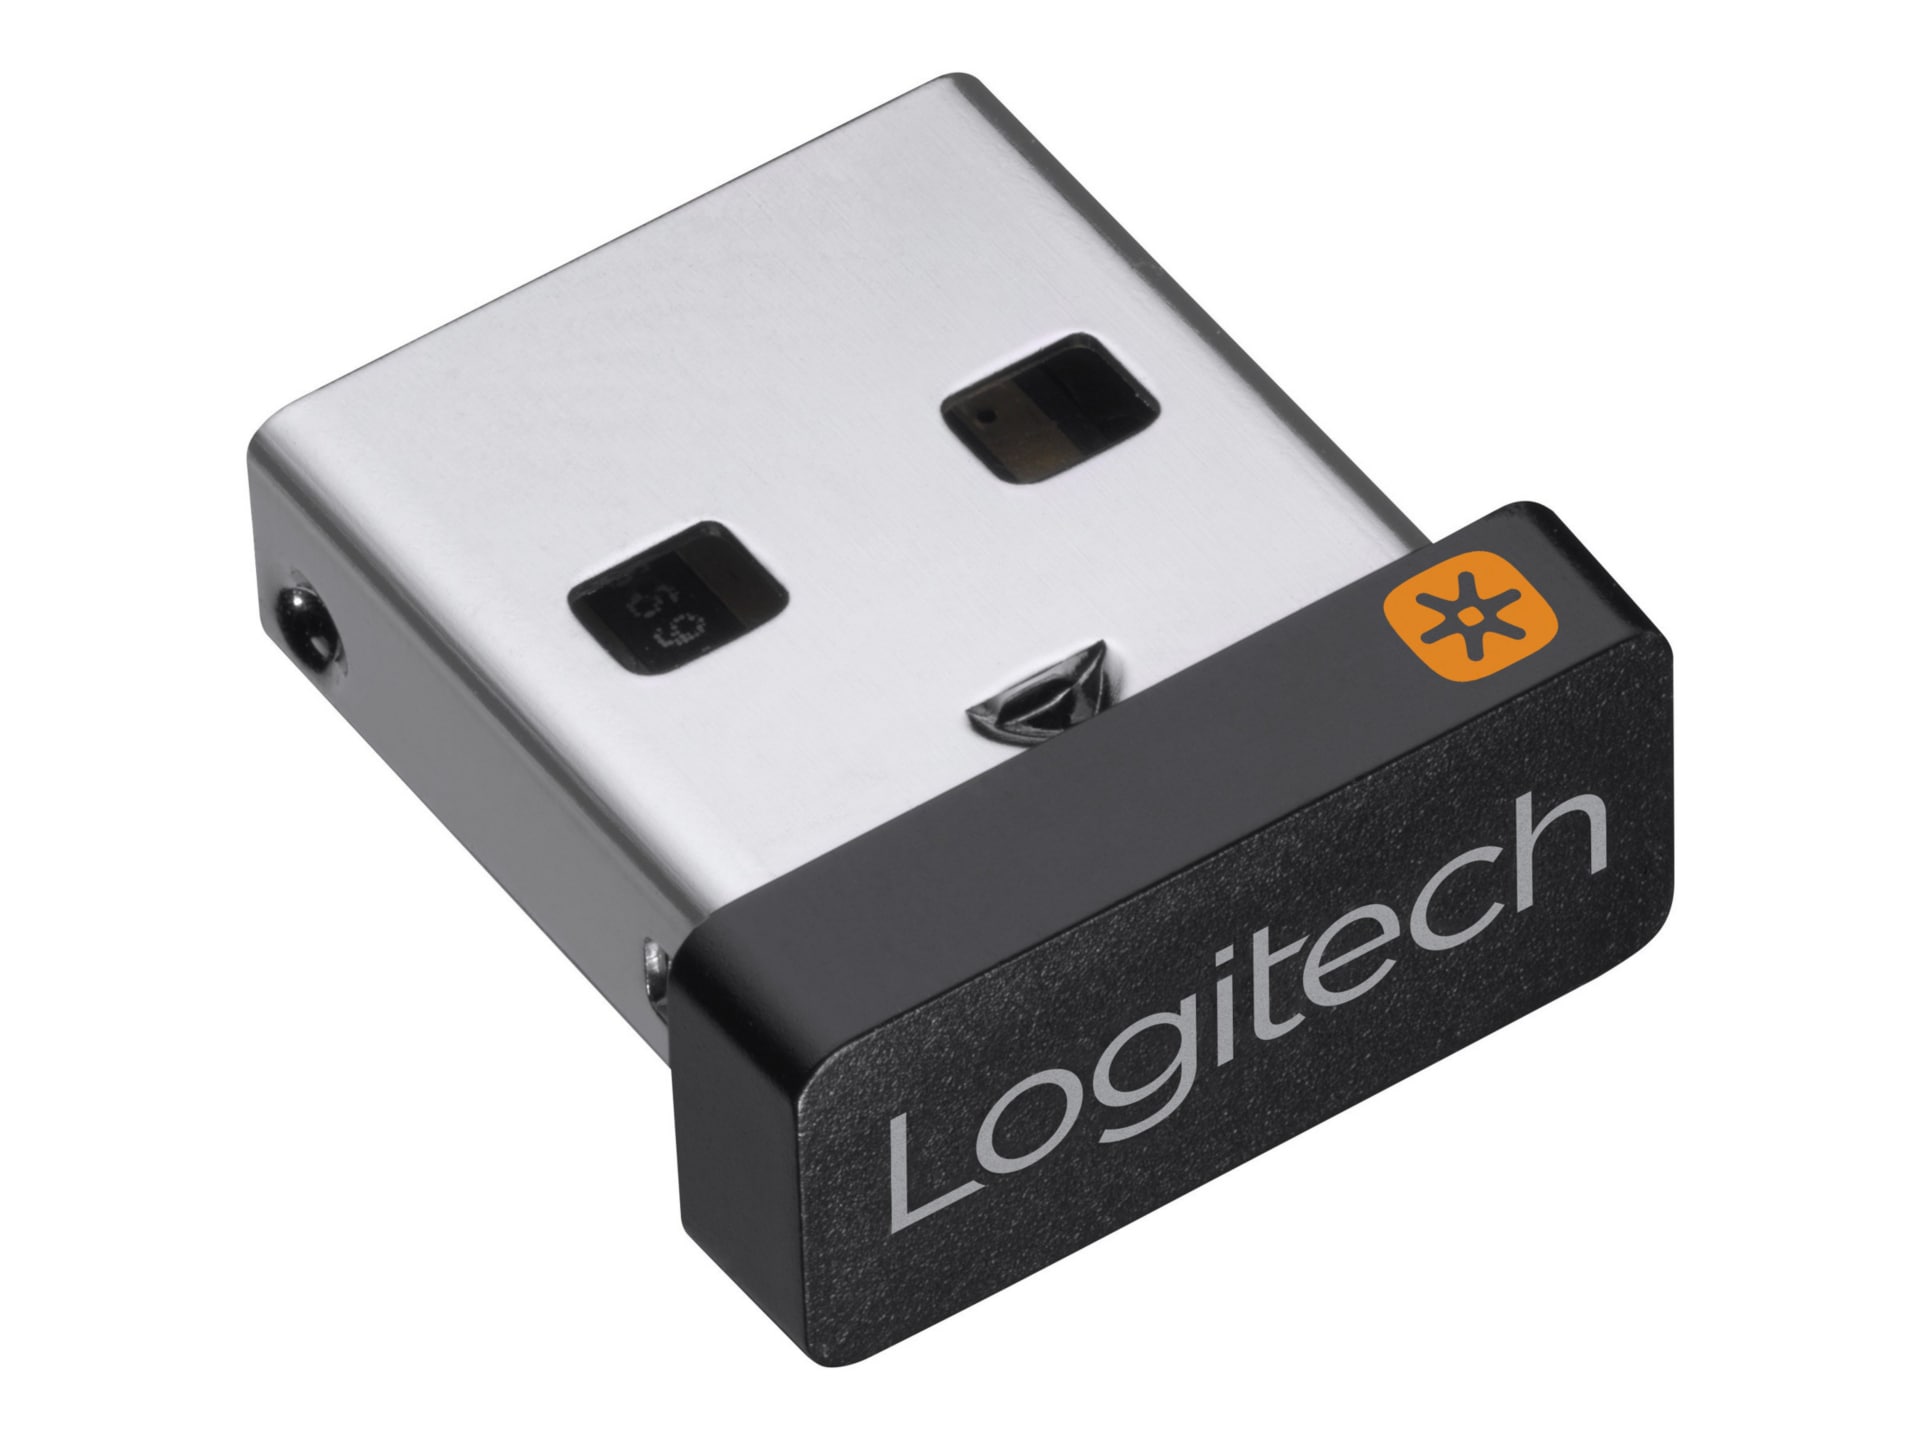 Logitech Unifying Receiver - wireless mouse / keyboard receiver - USB 910-005235 - Office Furniture - CDW.com